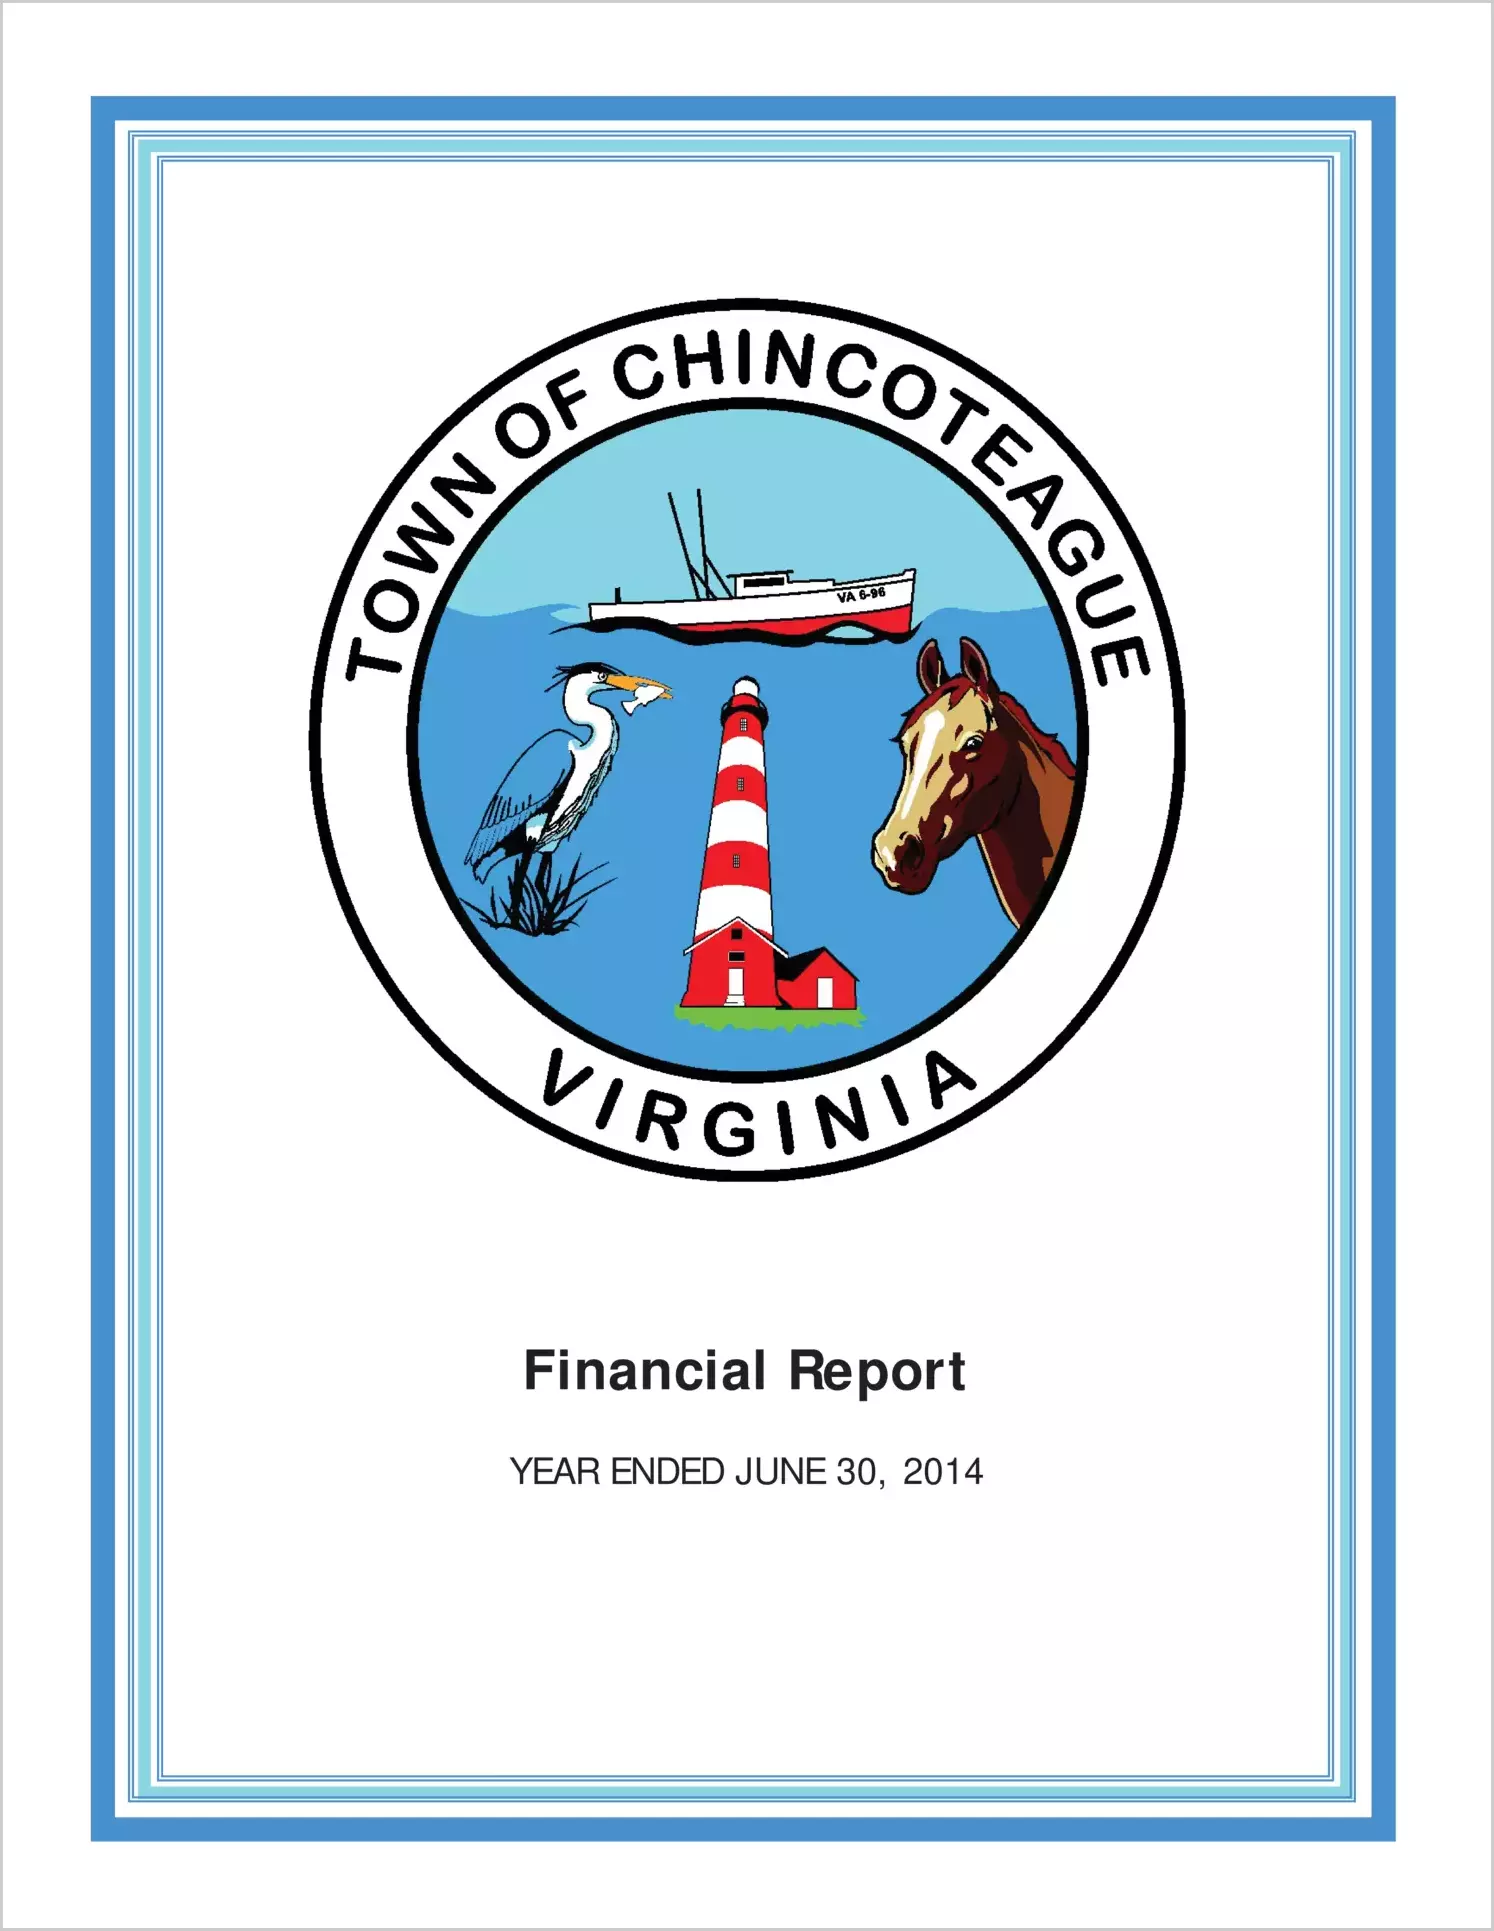 2014 Annual Financial Report for Town of Chincoteague